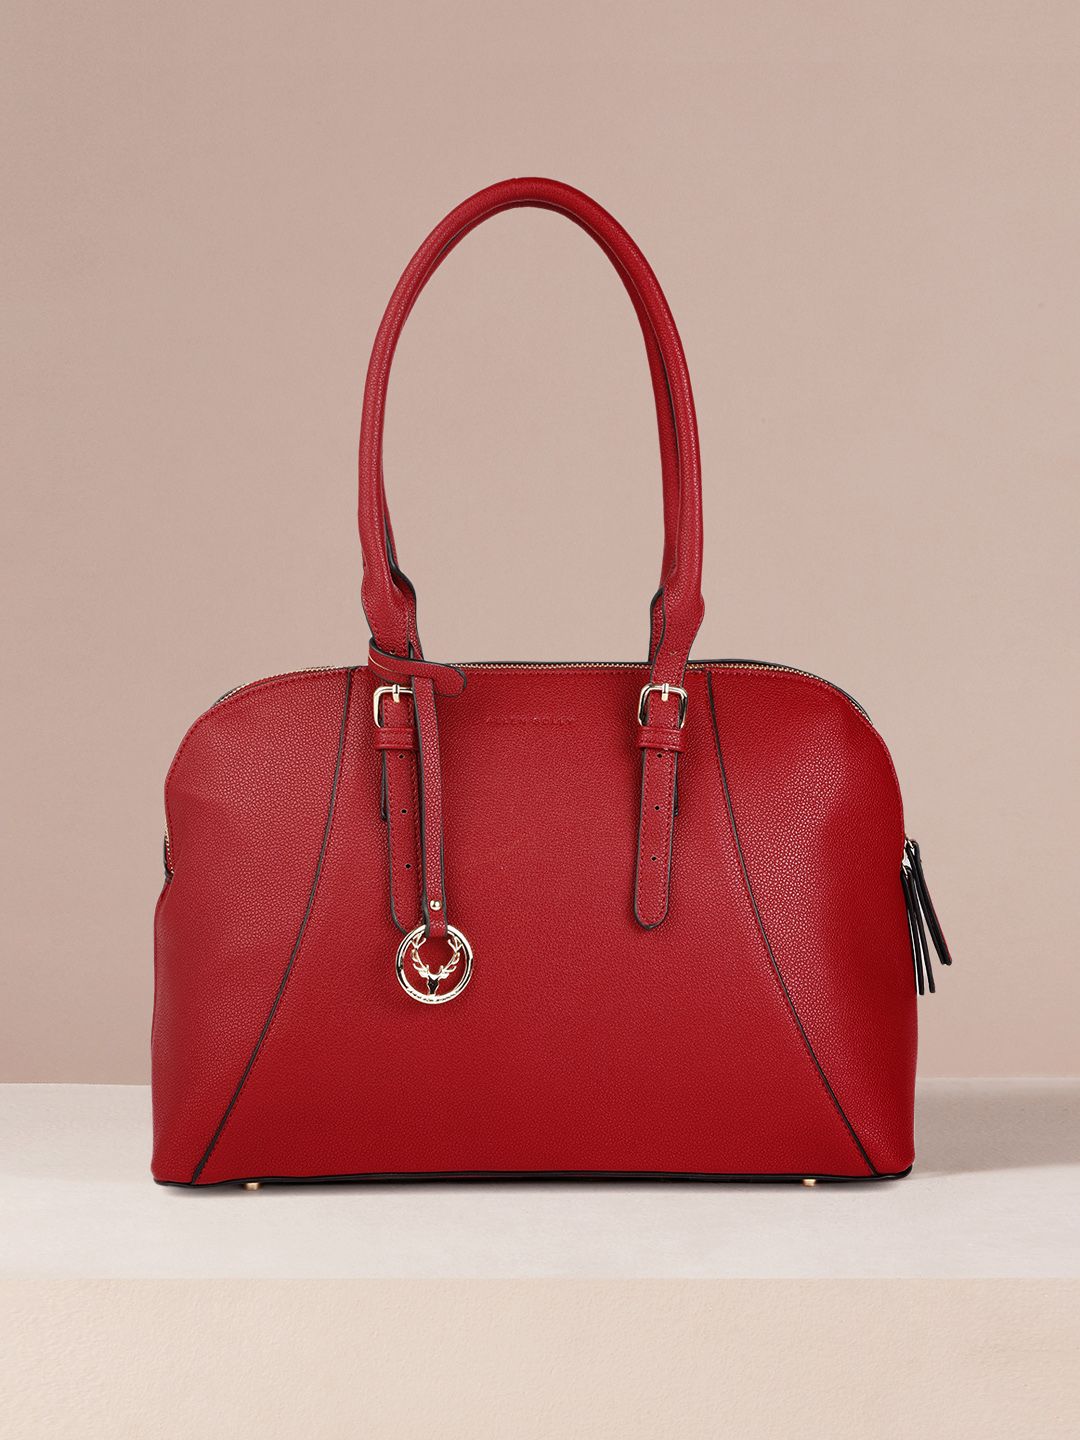 Allen Solly Red Solid PU Regular Structured Shoulder Bag with Brand Logo Tasselled Detail Price in India